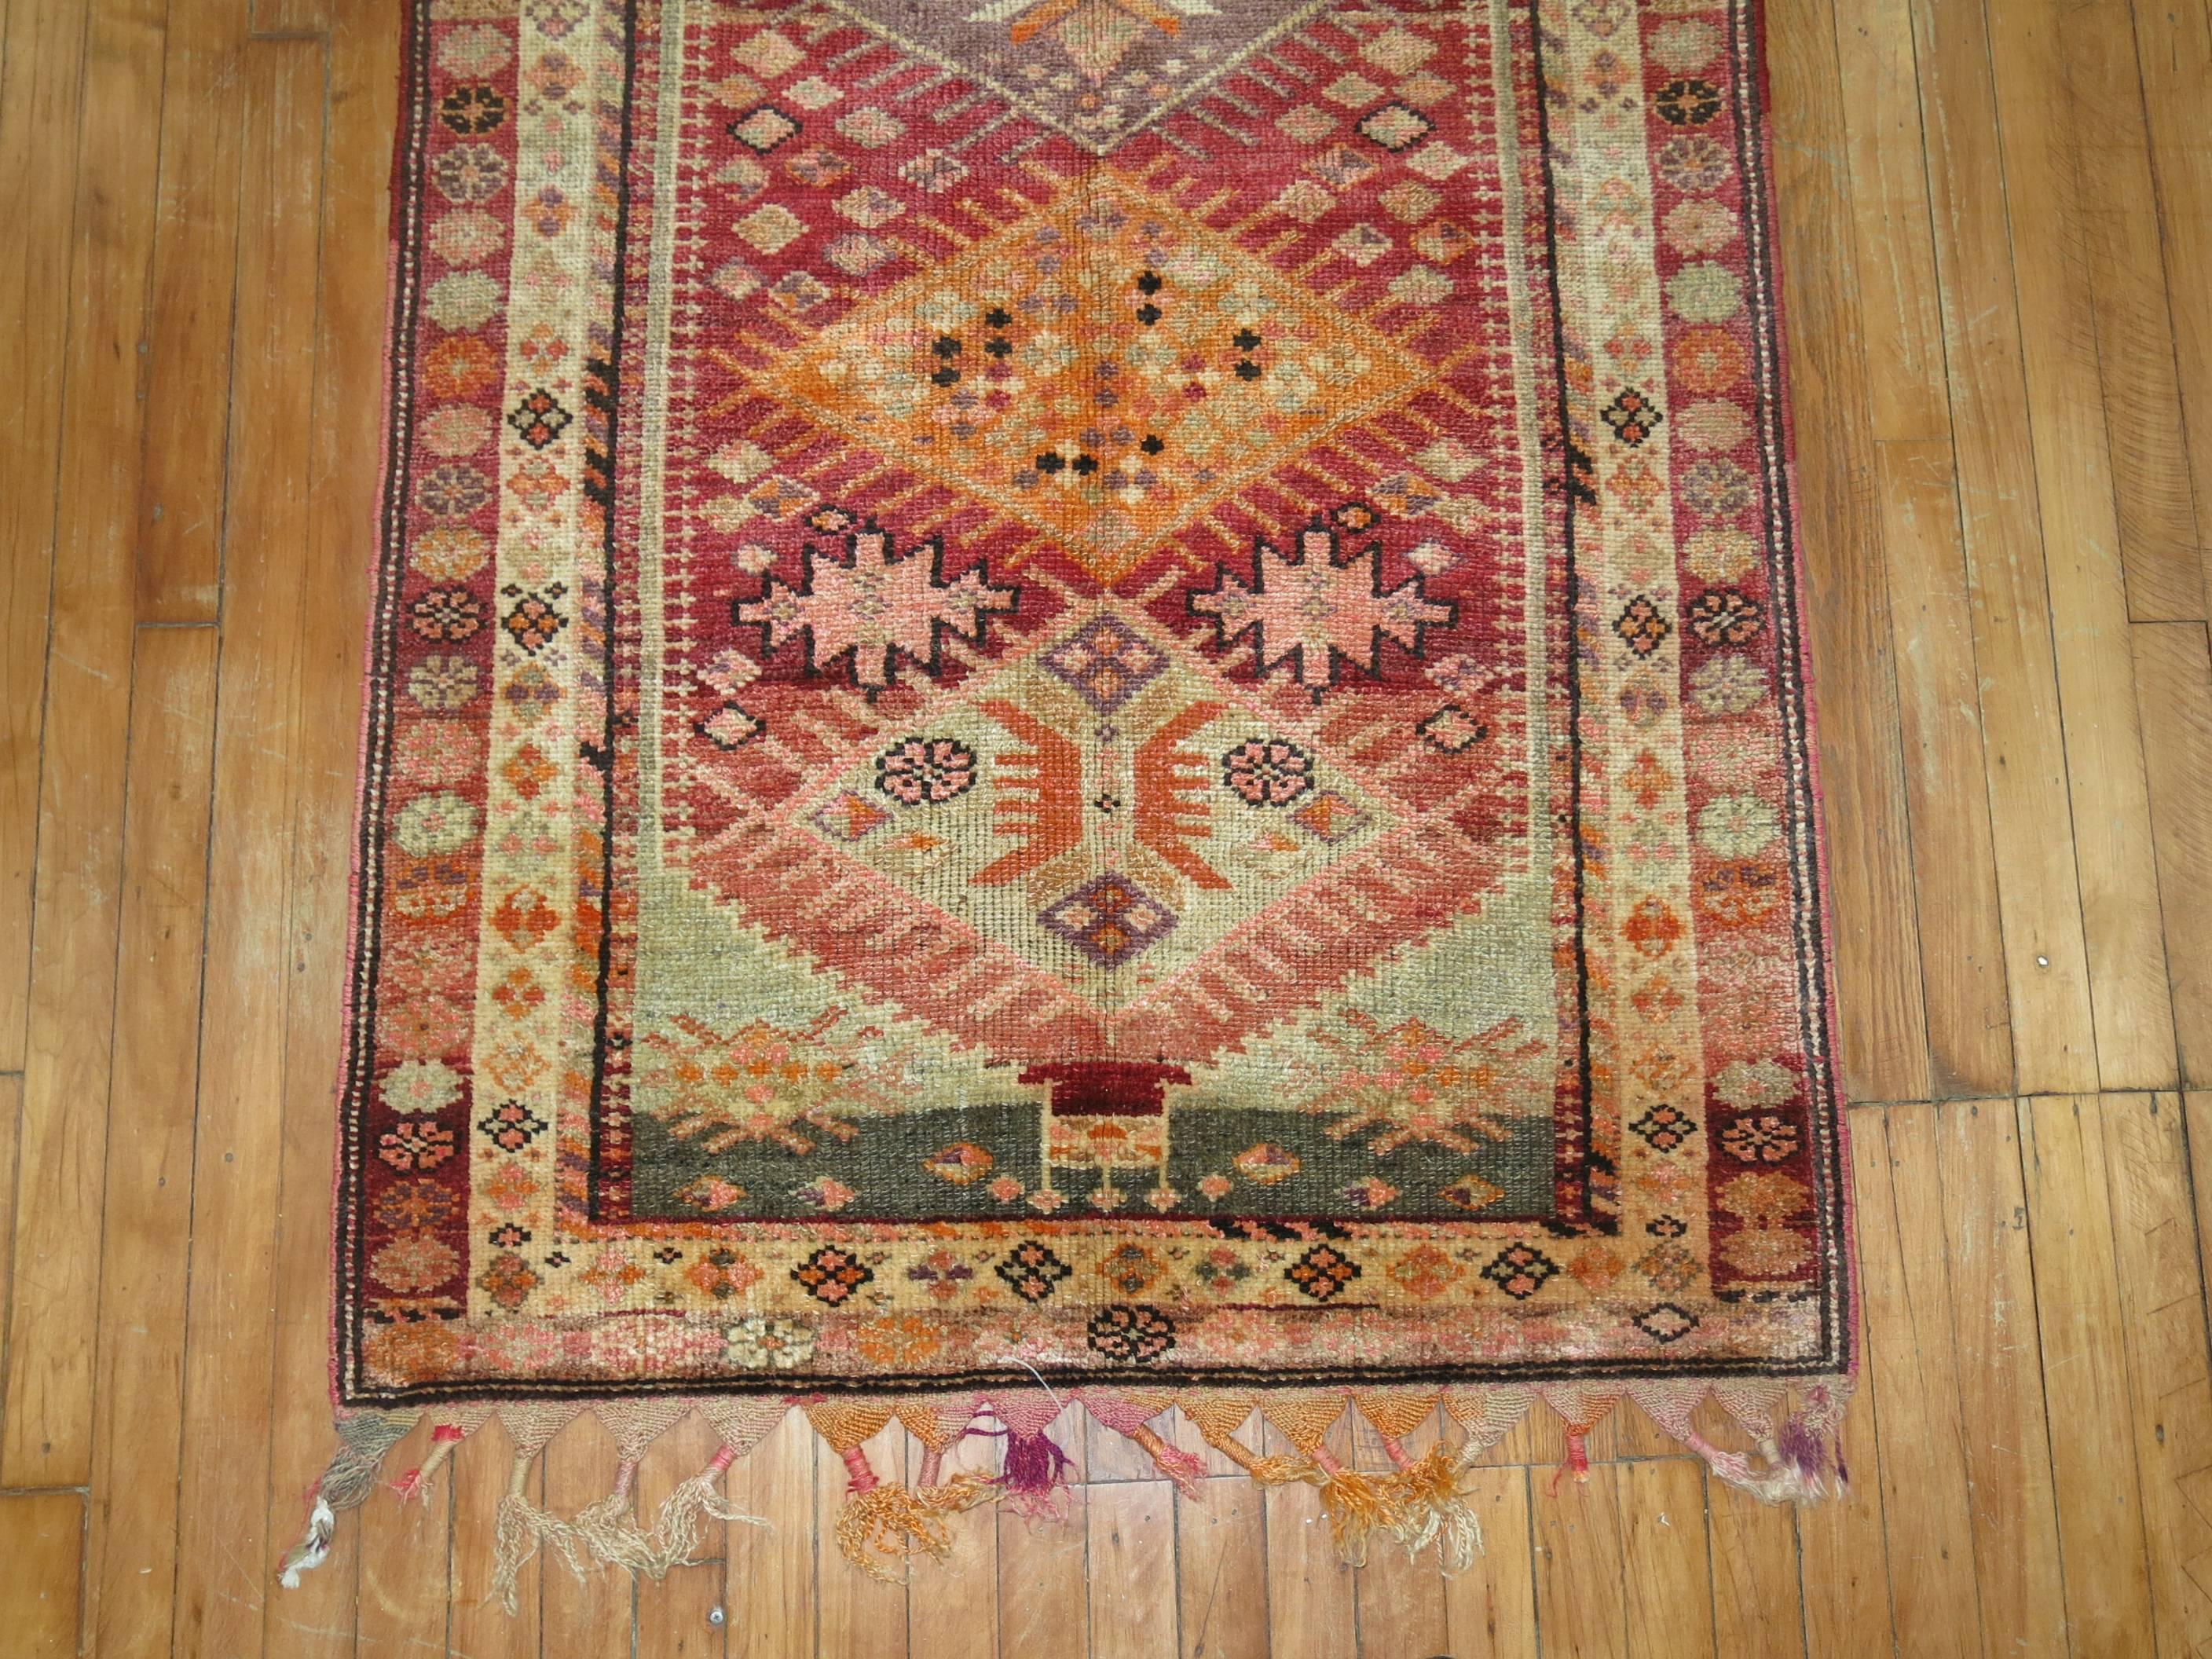 One of a kind Turkish Anatolian runner with a triangular geometric motif throughout in bright colors on a blood red color ground.

Measures: 3'3